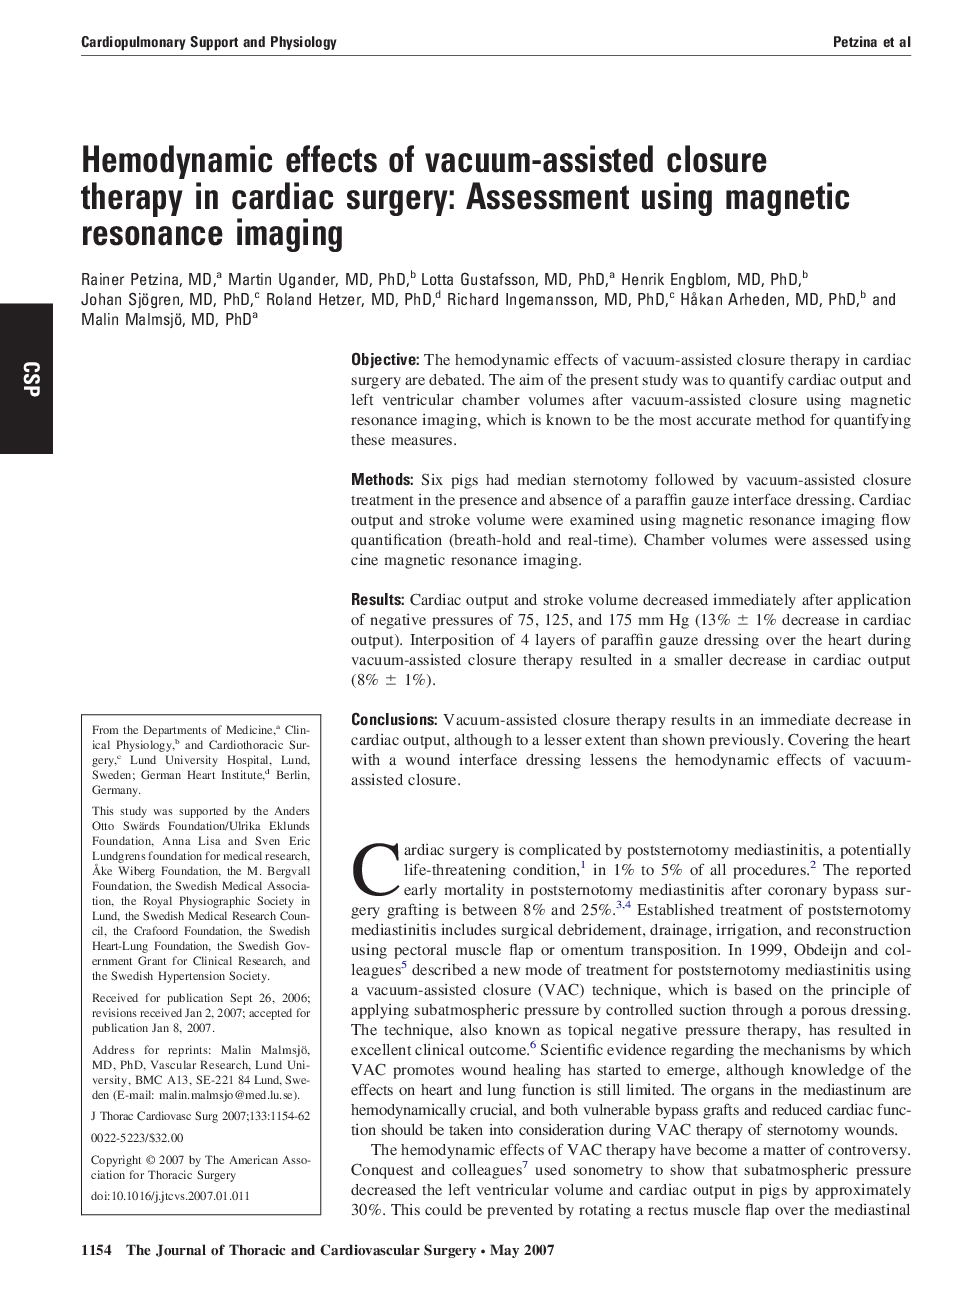 Hemodynamic effects of vacuum-assisted closure therapy in cardiac surgery: Assessment using magnetic resonance imaging 